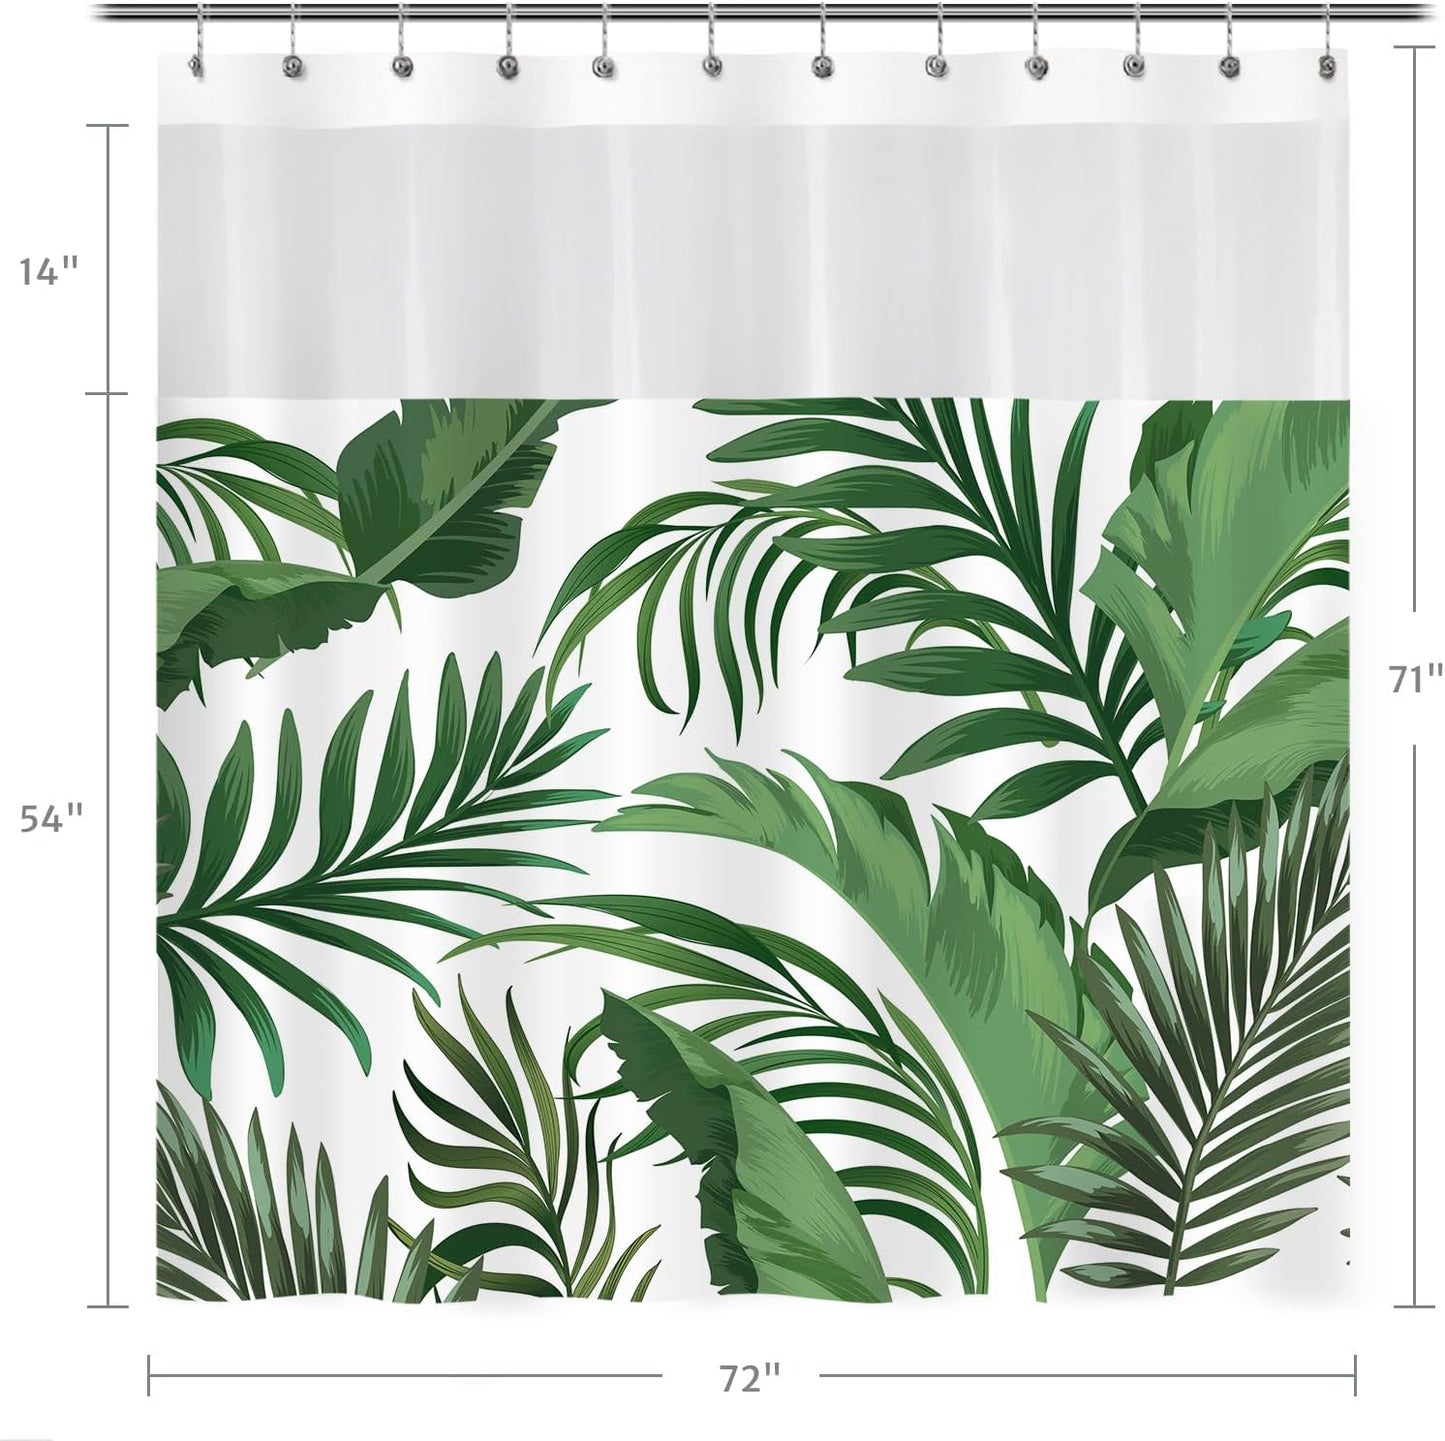 Palm Leaf Shower Curtain with Snap-in Fabric Liner, Green Tropical Shower Curtains with Mesh Top Window for Bathroom Decor, Botanical Plant Bathroom Curtains, See Through Sheer Window, 71x71